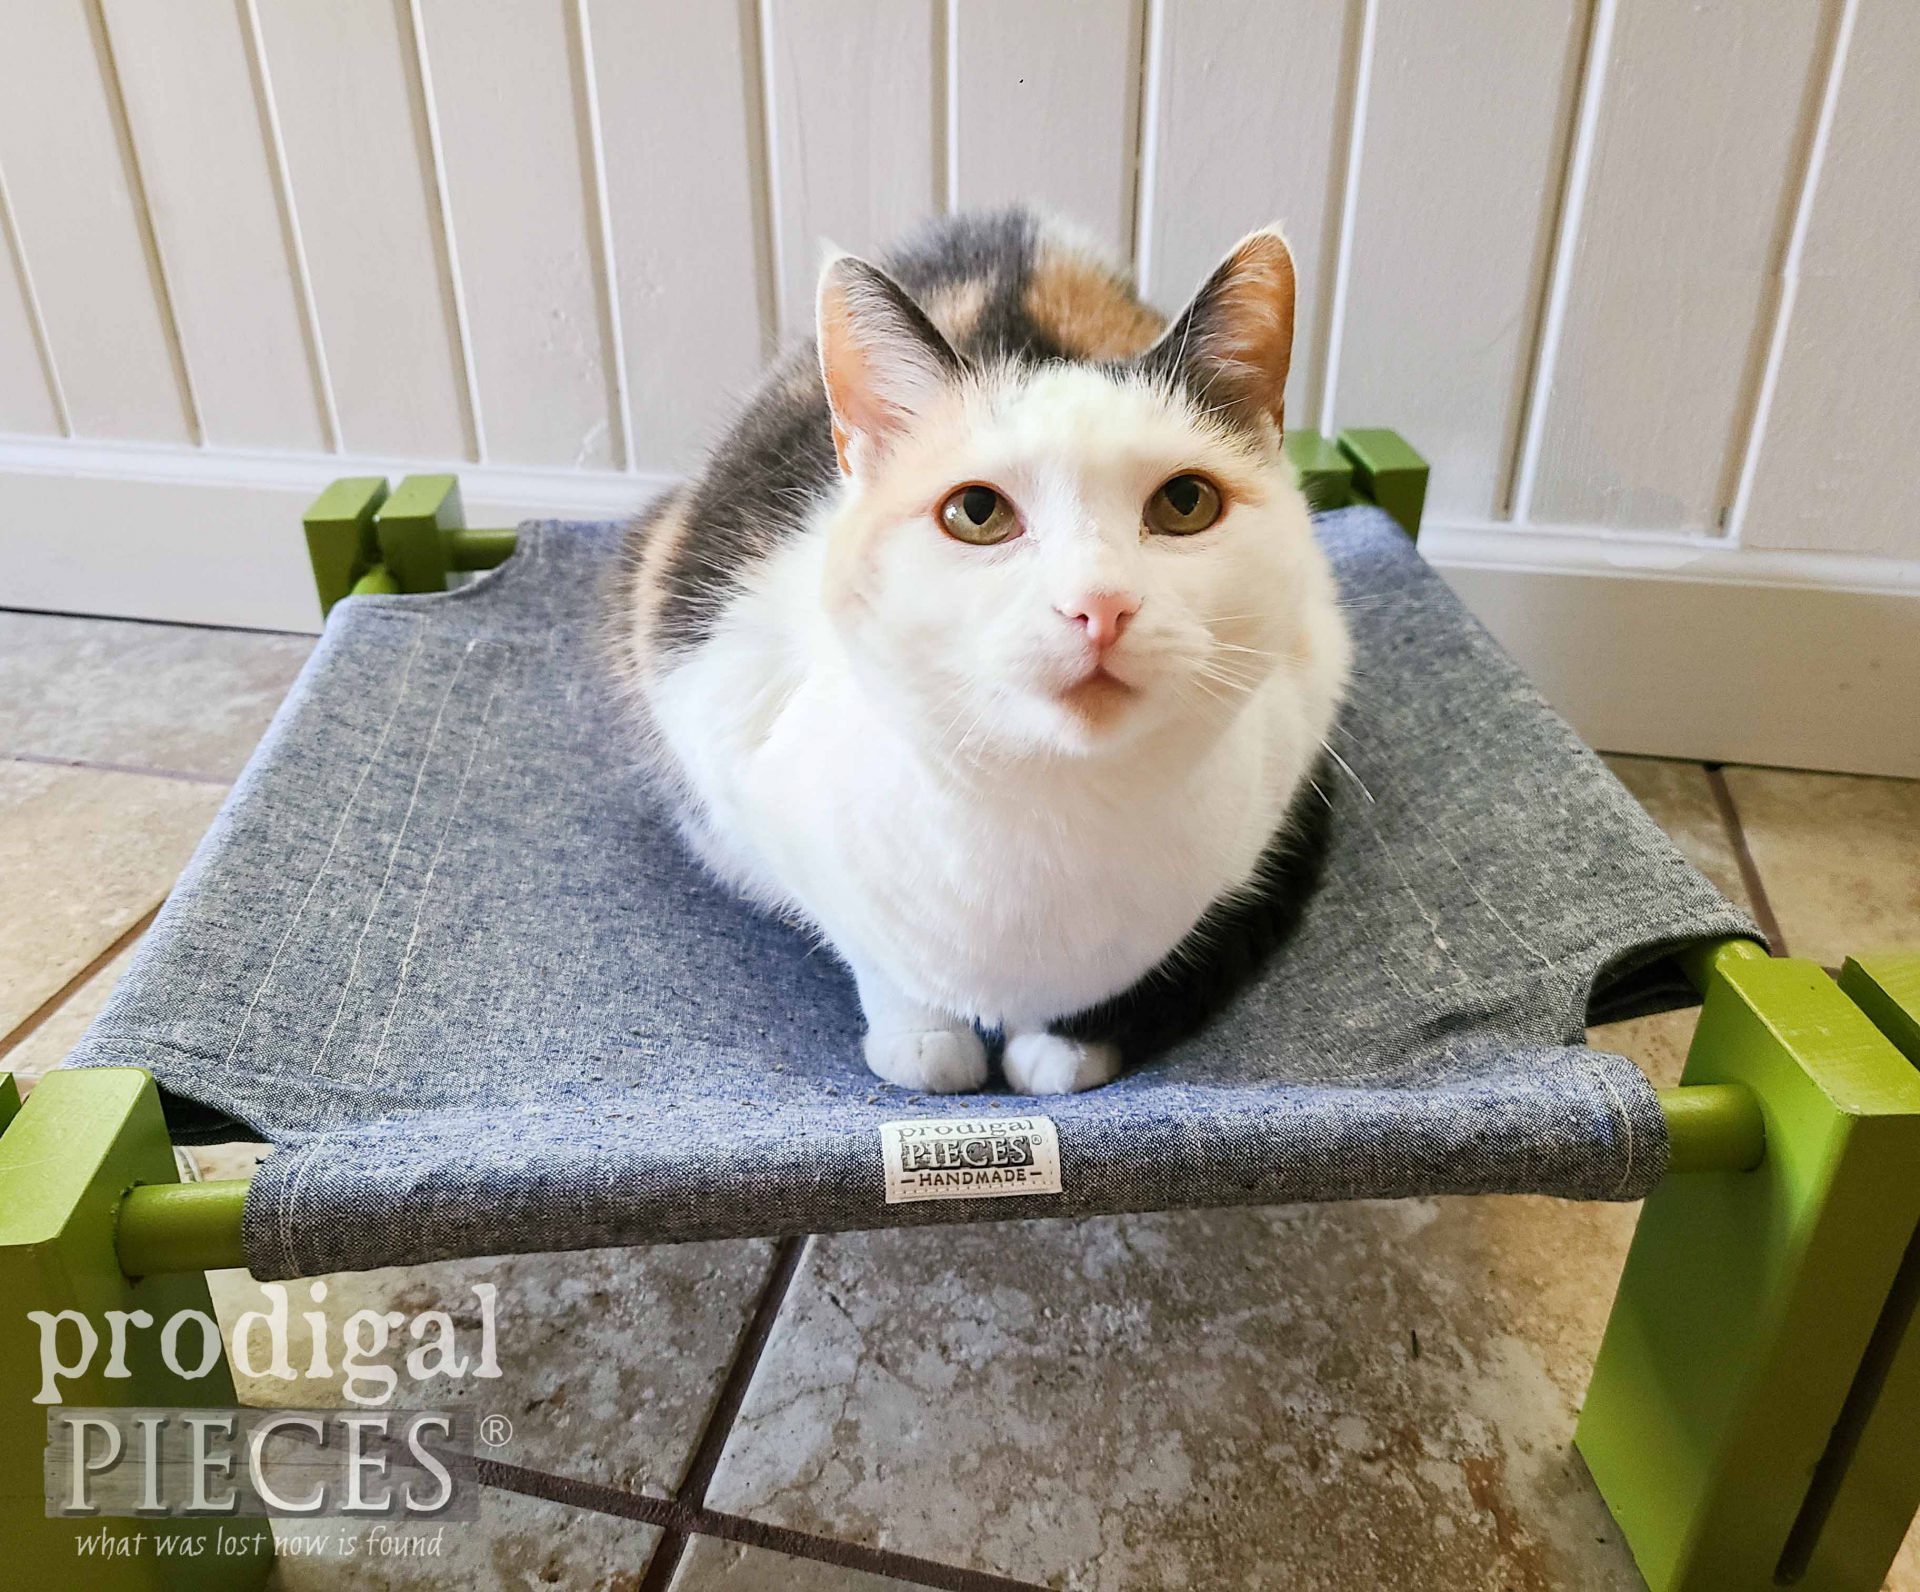 Adorably Cute Calico Cat on DIY Cat Bed Hammock by Larissa of Prodigal Pieces | prodigalpieces #prodigalpieces #calico #cat #diy #giftideas